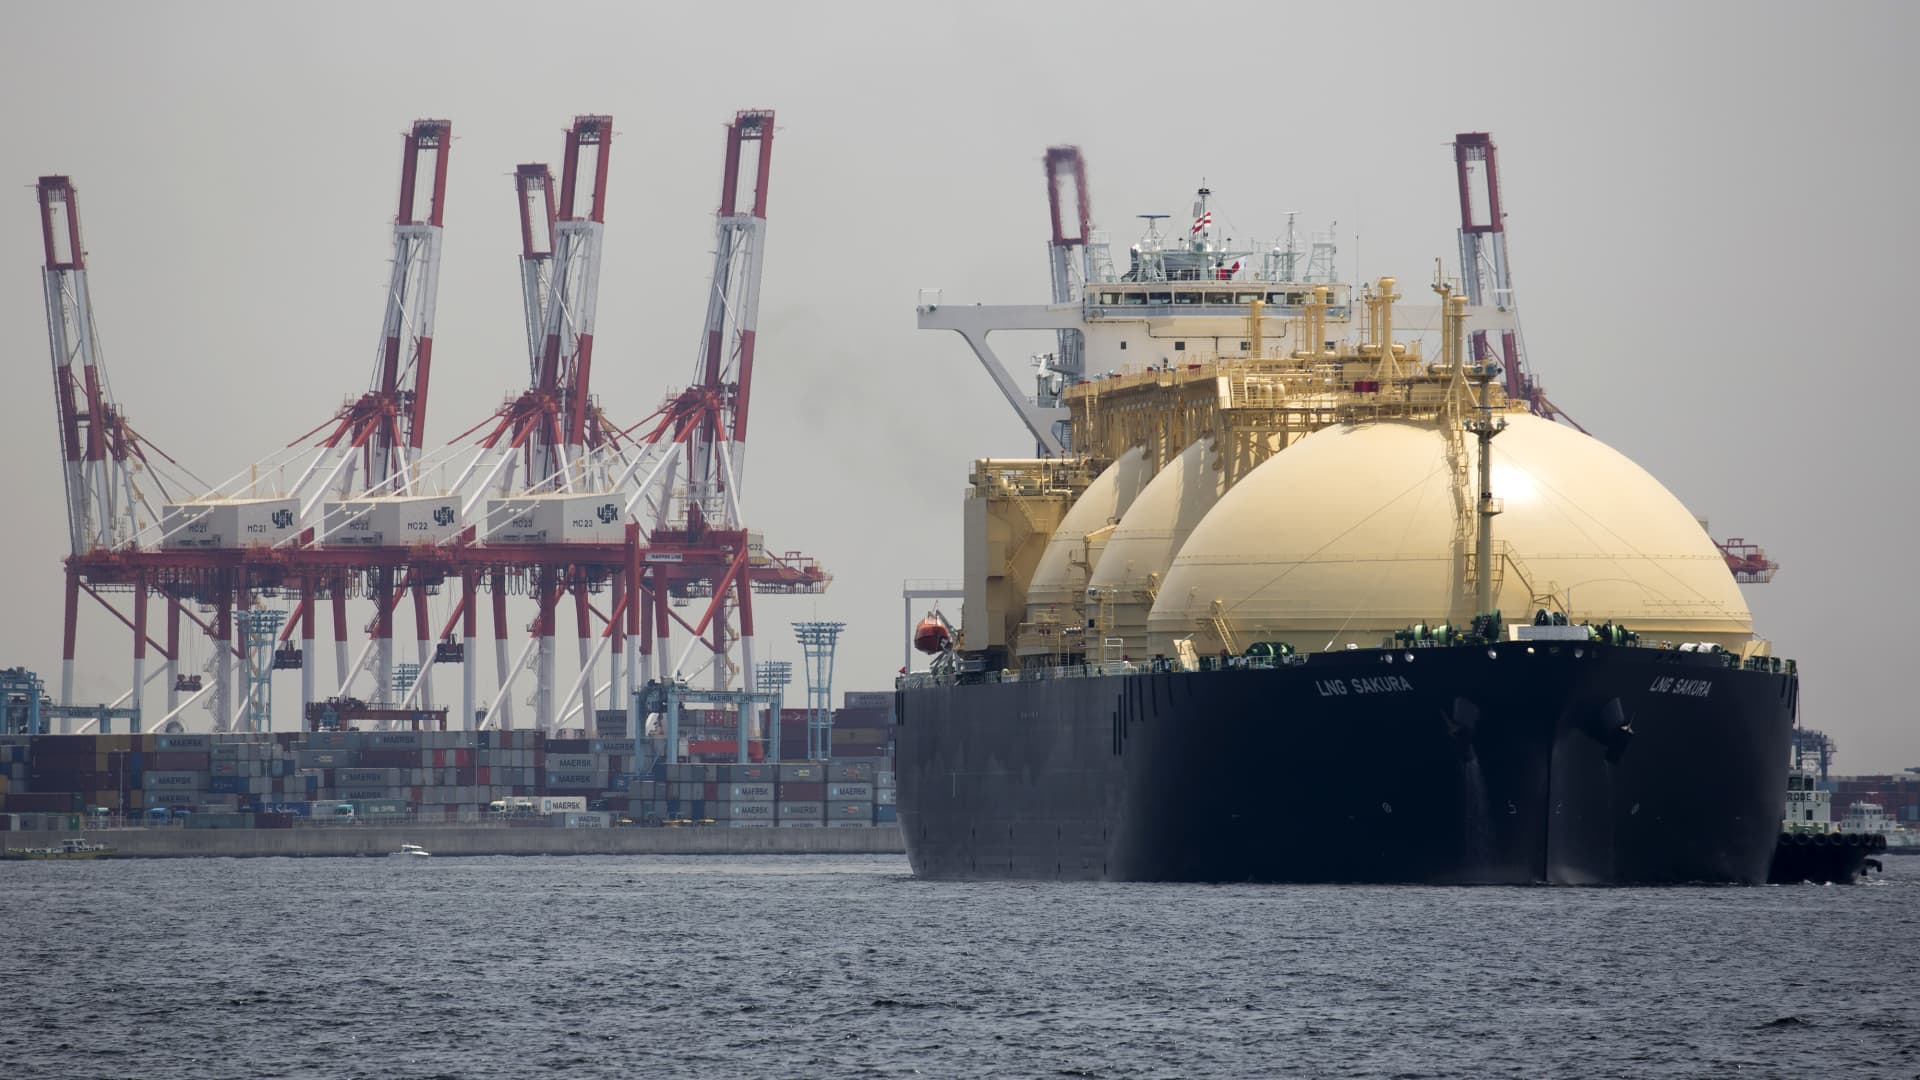 The global gas glut could reach multi-decade highs in the coming years, Morgan Stanley says